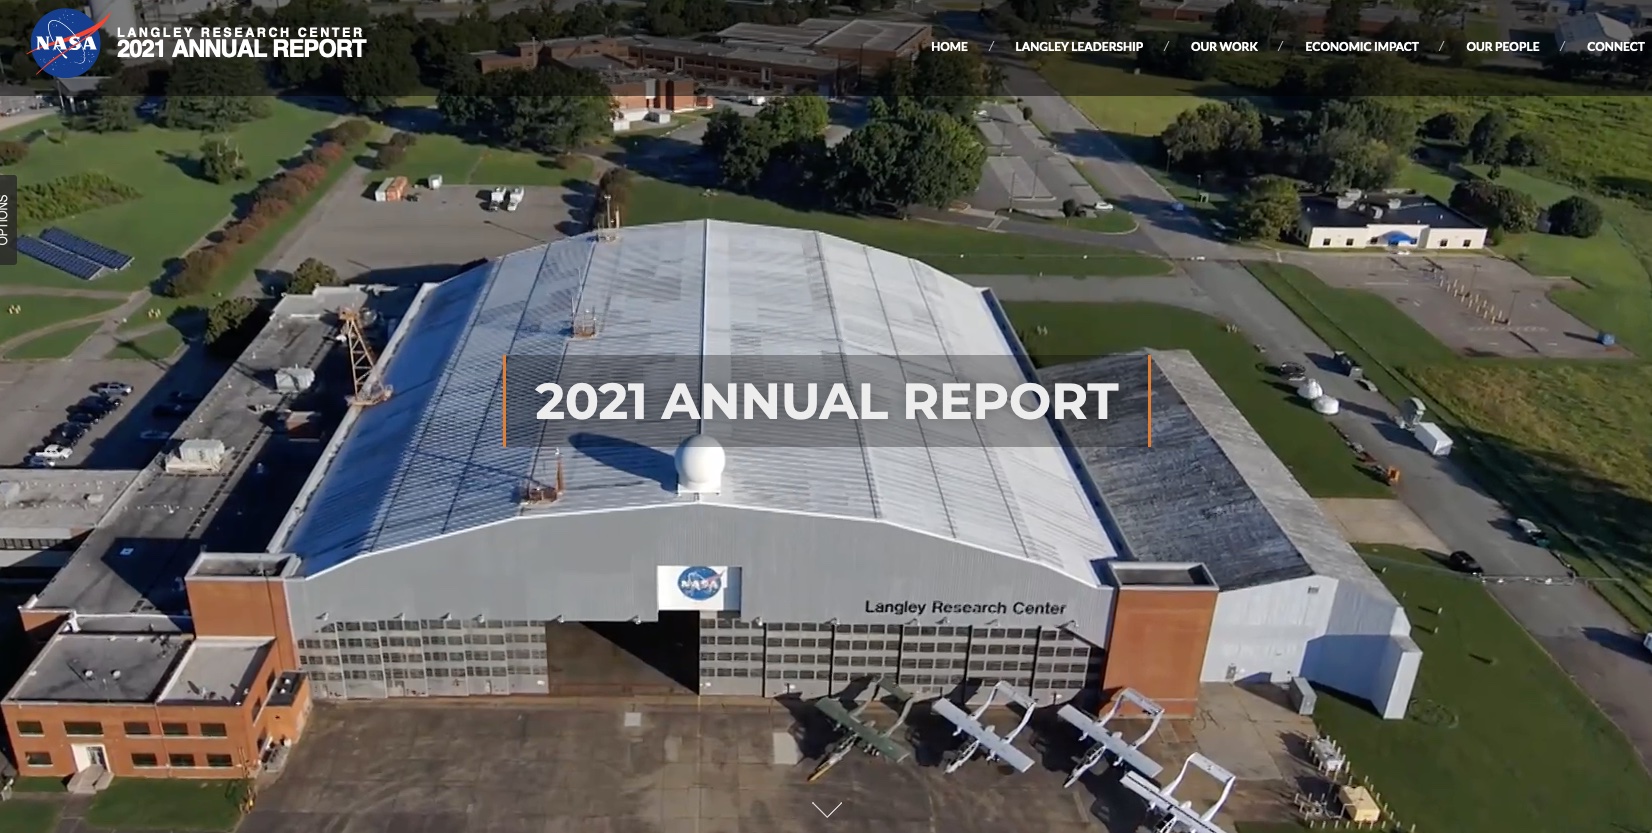 For the first time, NASA’s Langley Research Center has published its annual report as a website.